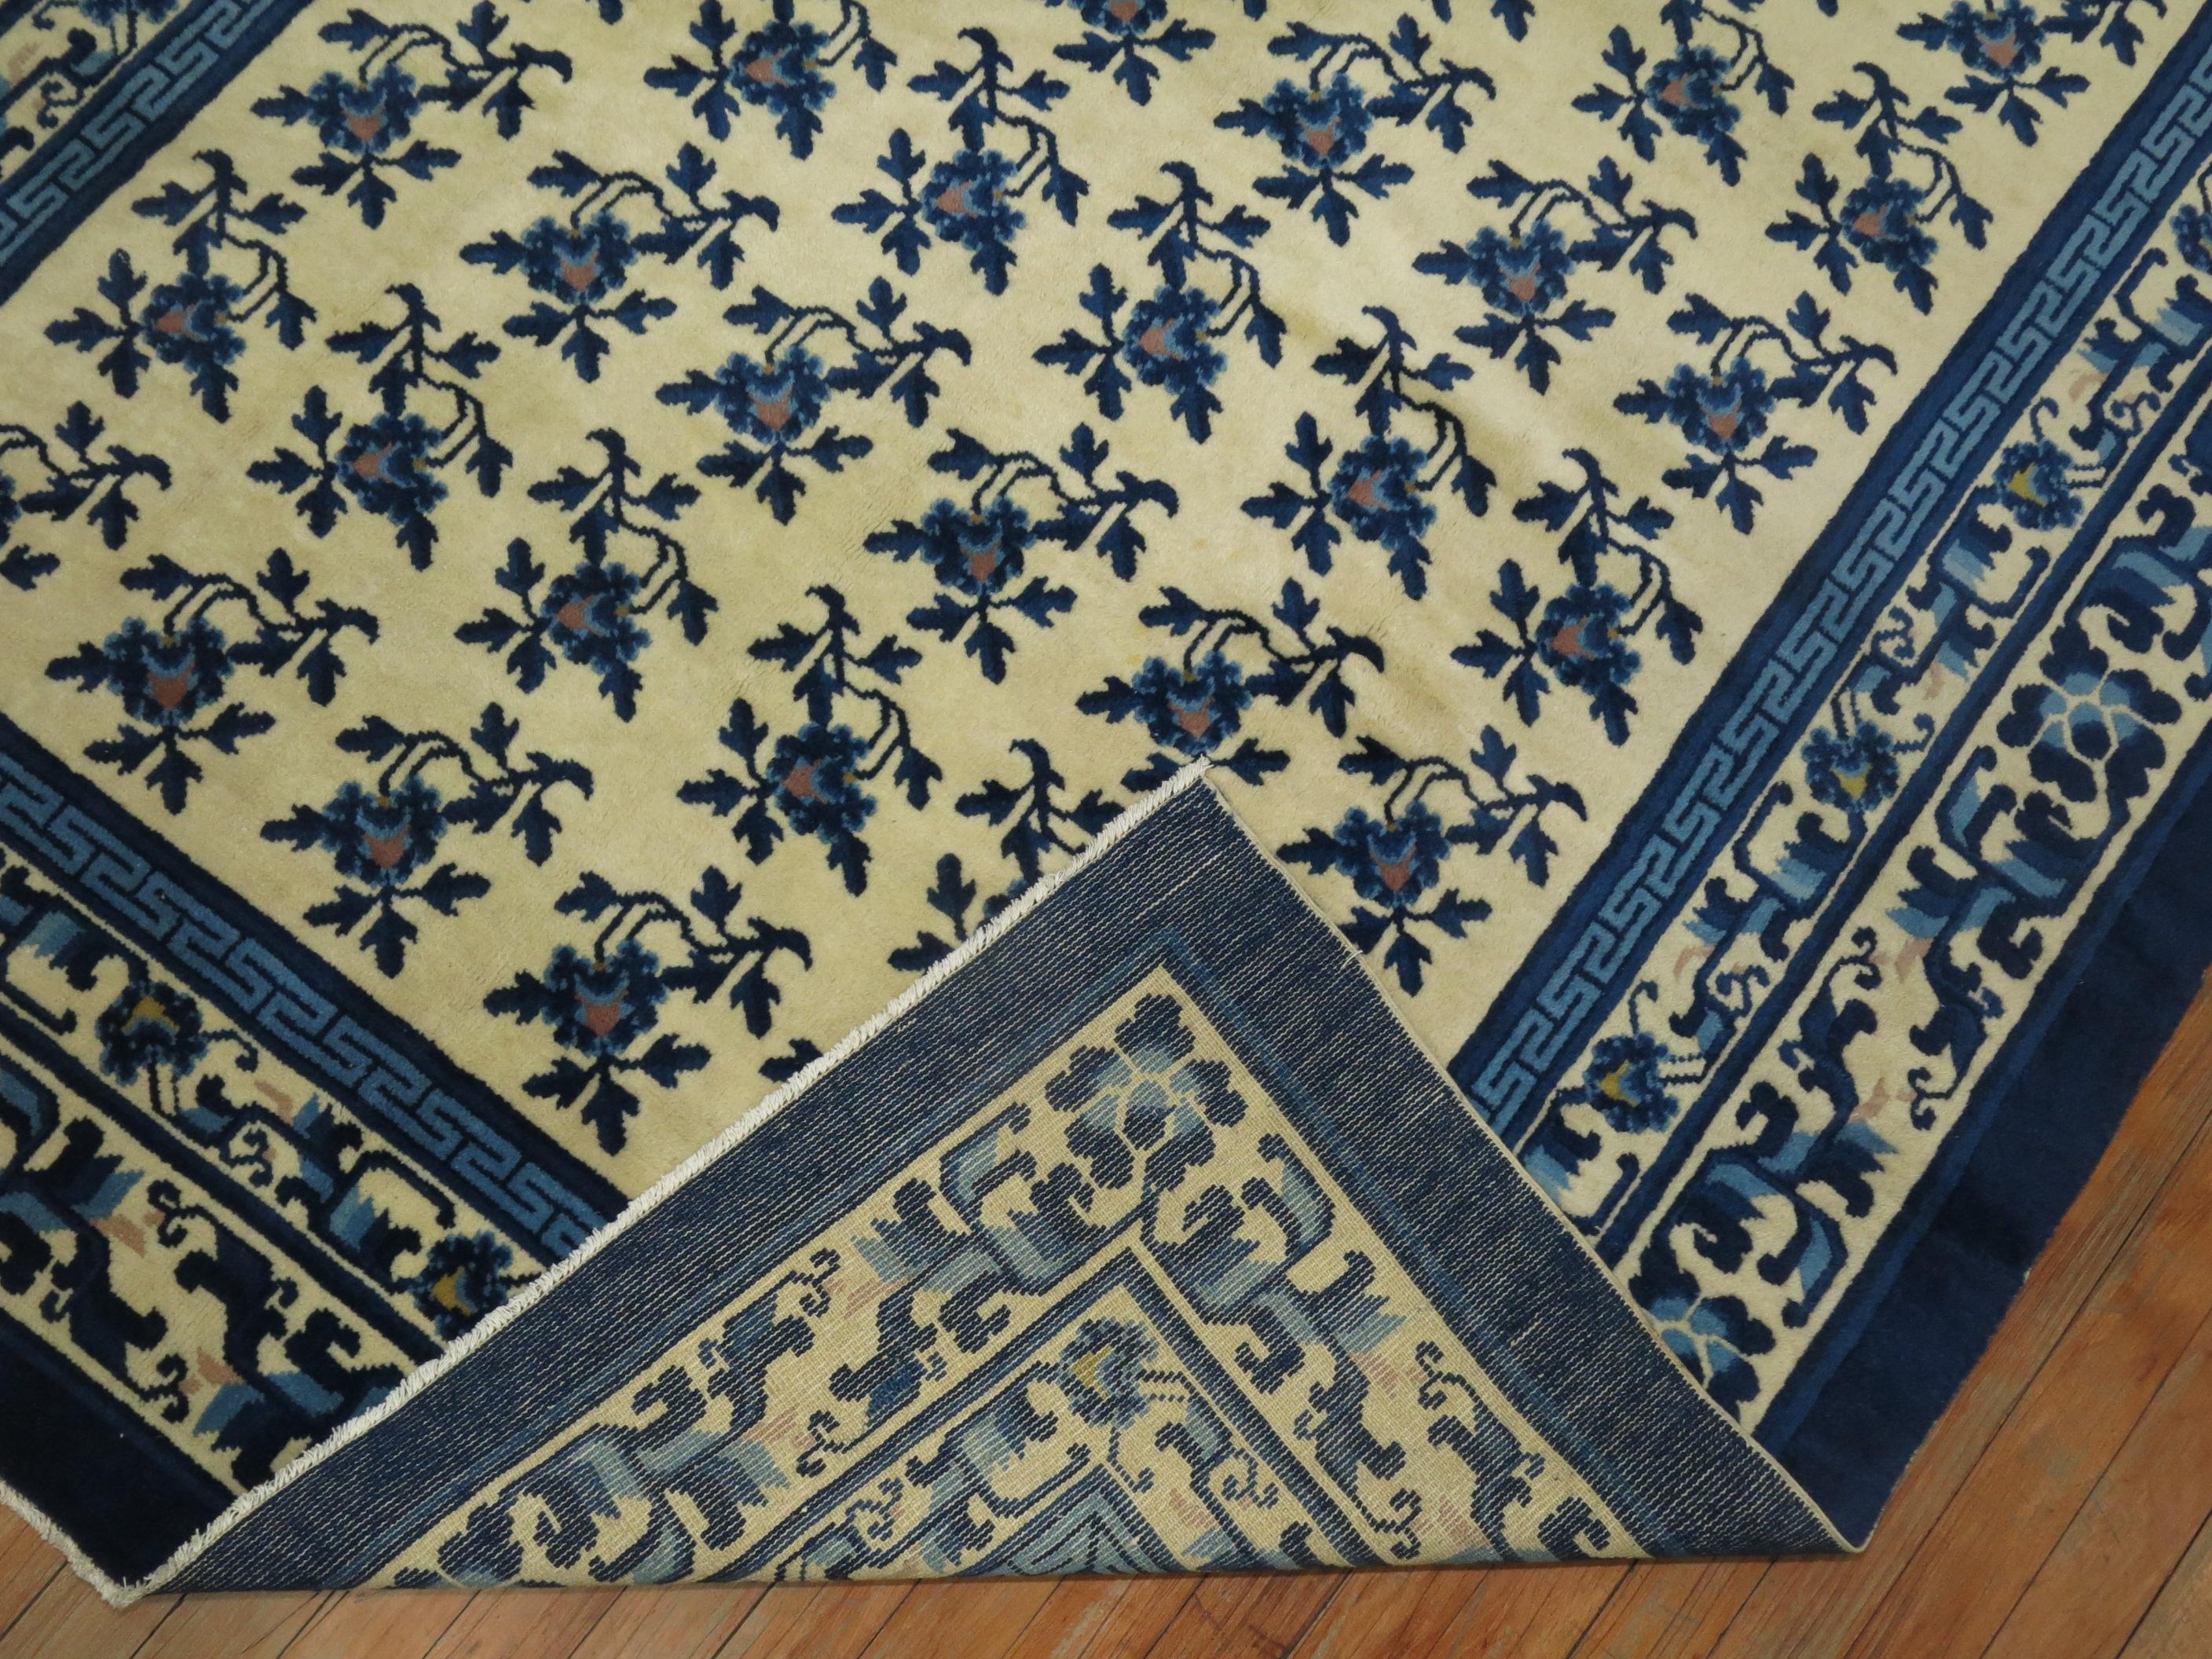 Floral vintage Chinese rug in shades of creamy white and blue.

Measures: 5'1'' x 8'1''.